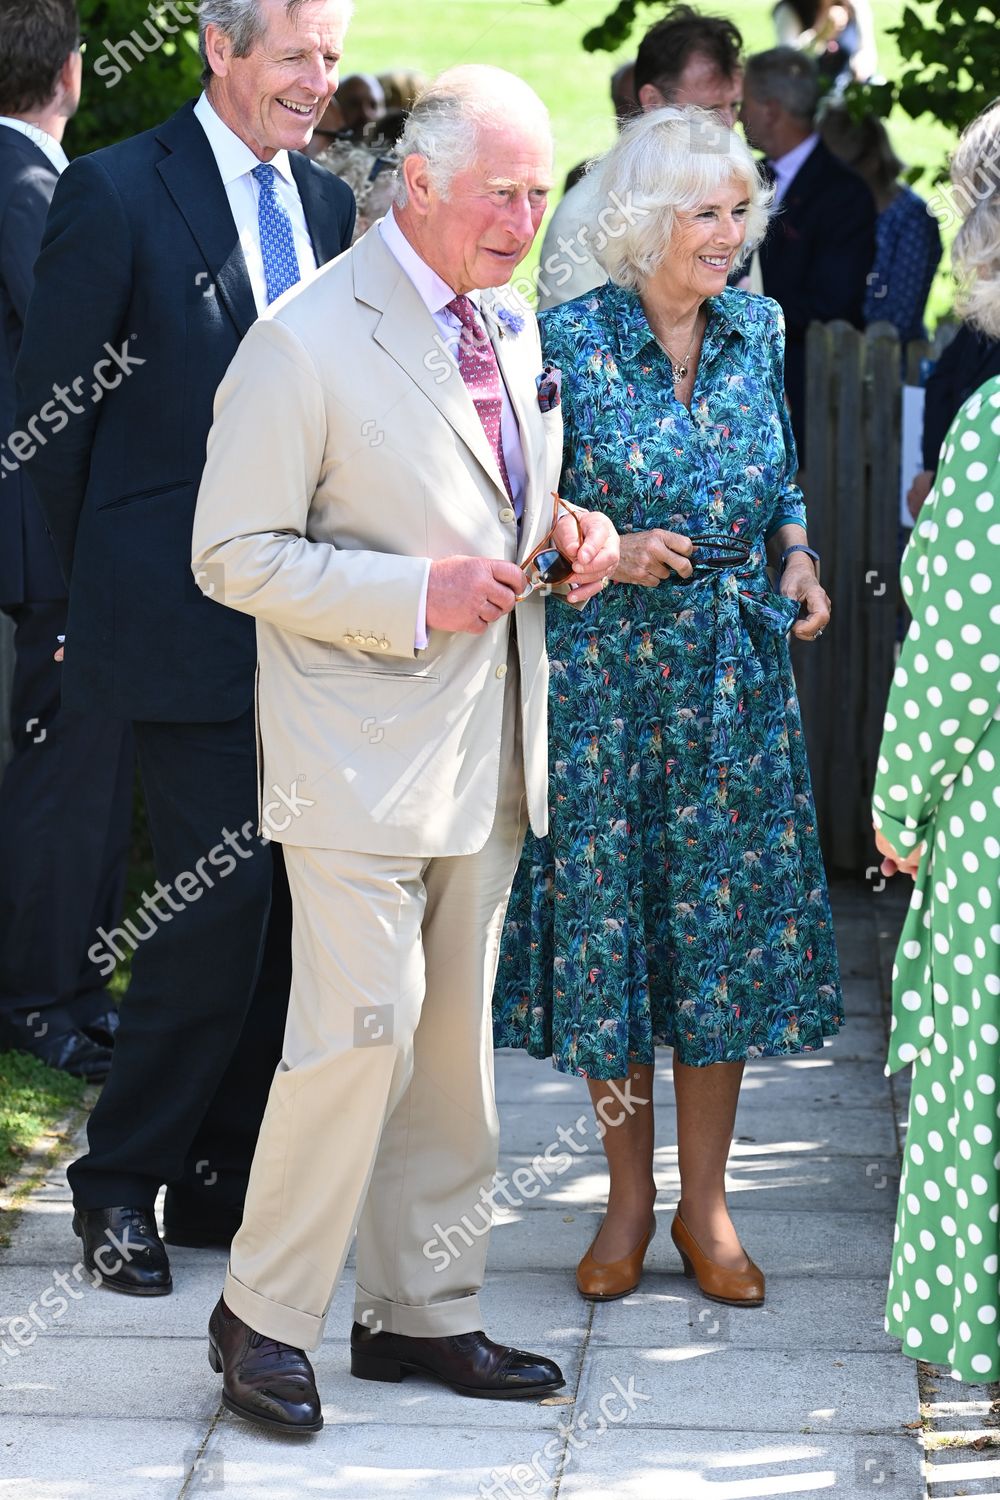 prince-charles-and-camilla-duchess-of-cornwall-visit-to-devon-and-cornwall-day-2-uk-shutterstock-editorial-12222608u.jpg